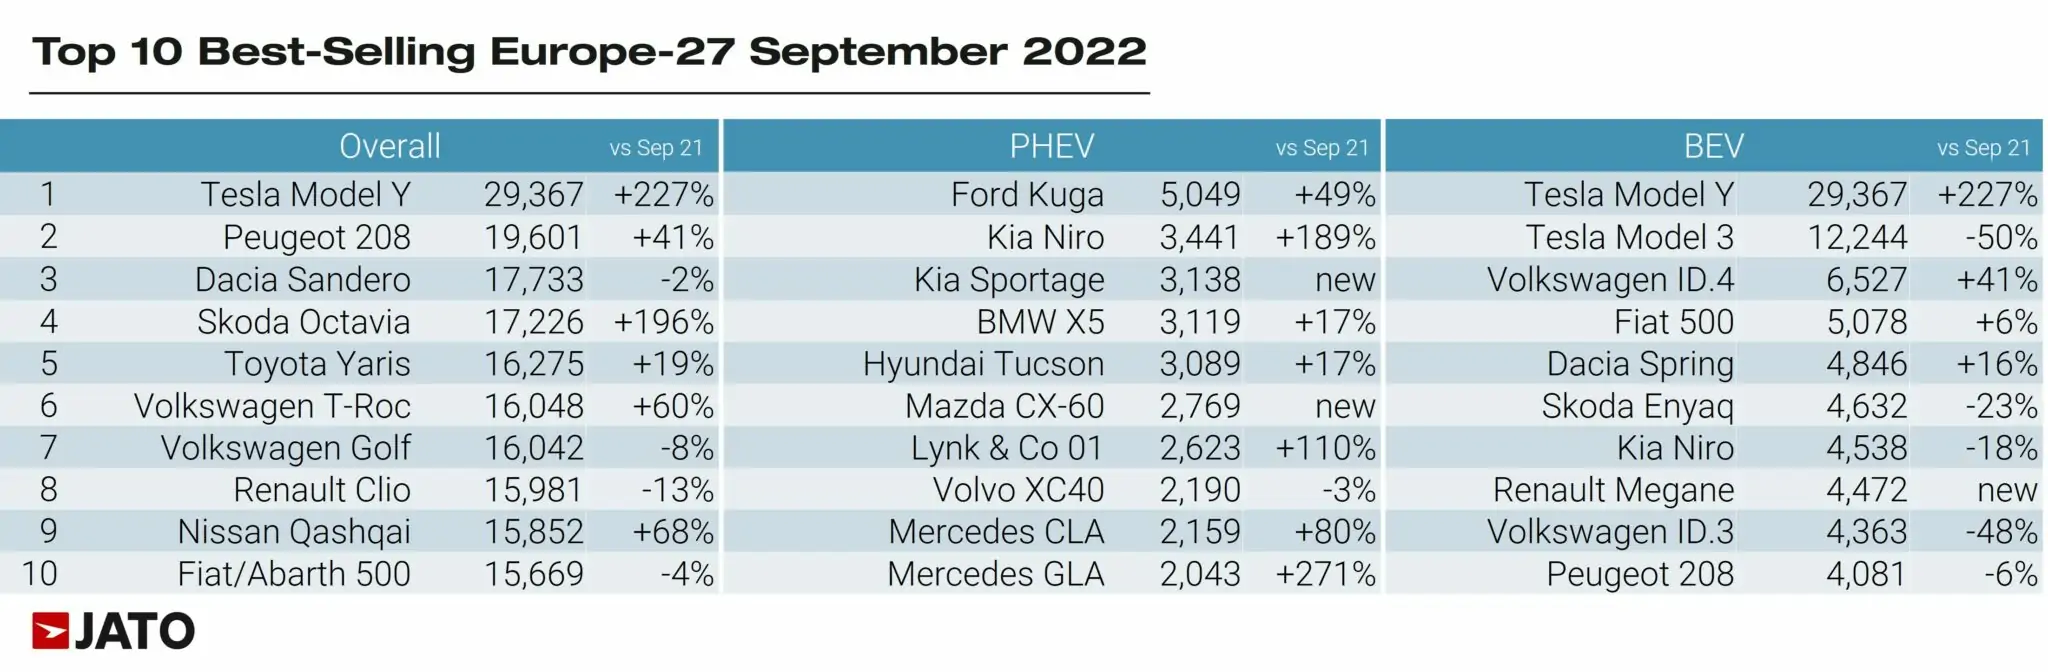 Top 10 cars sold in Europe in the month of September 2022 (overall, PHEV, BEV).